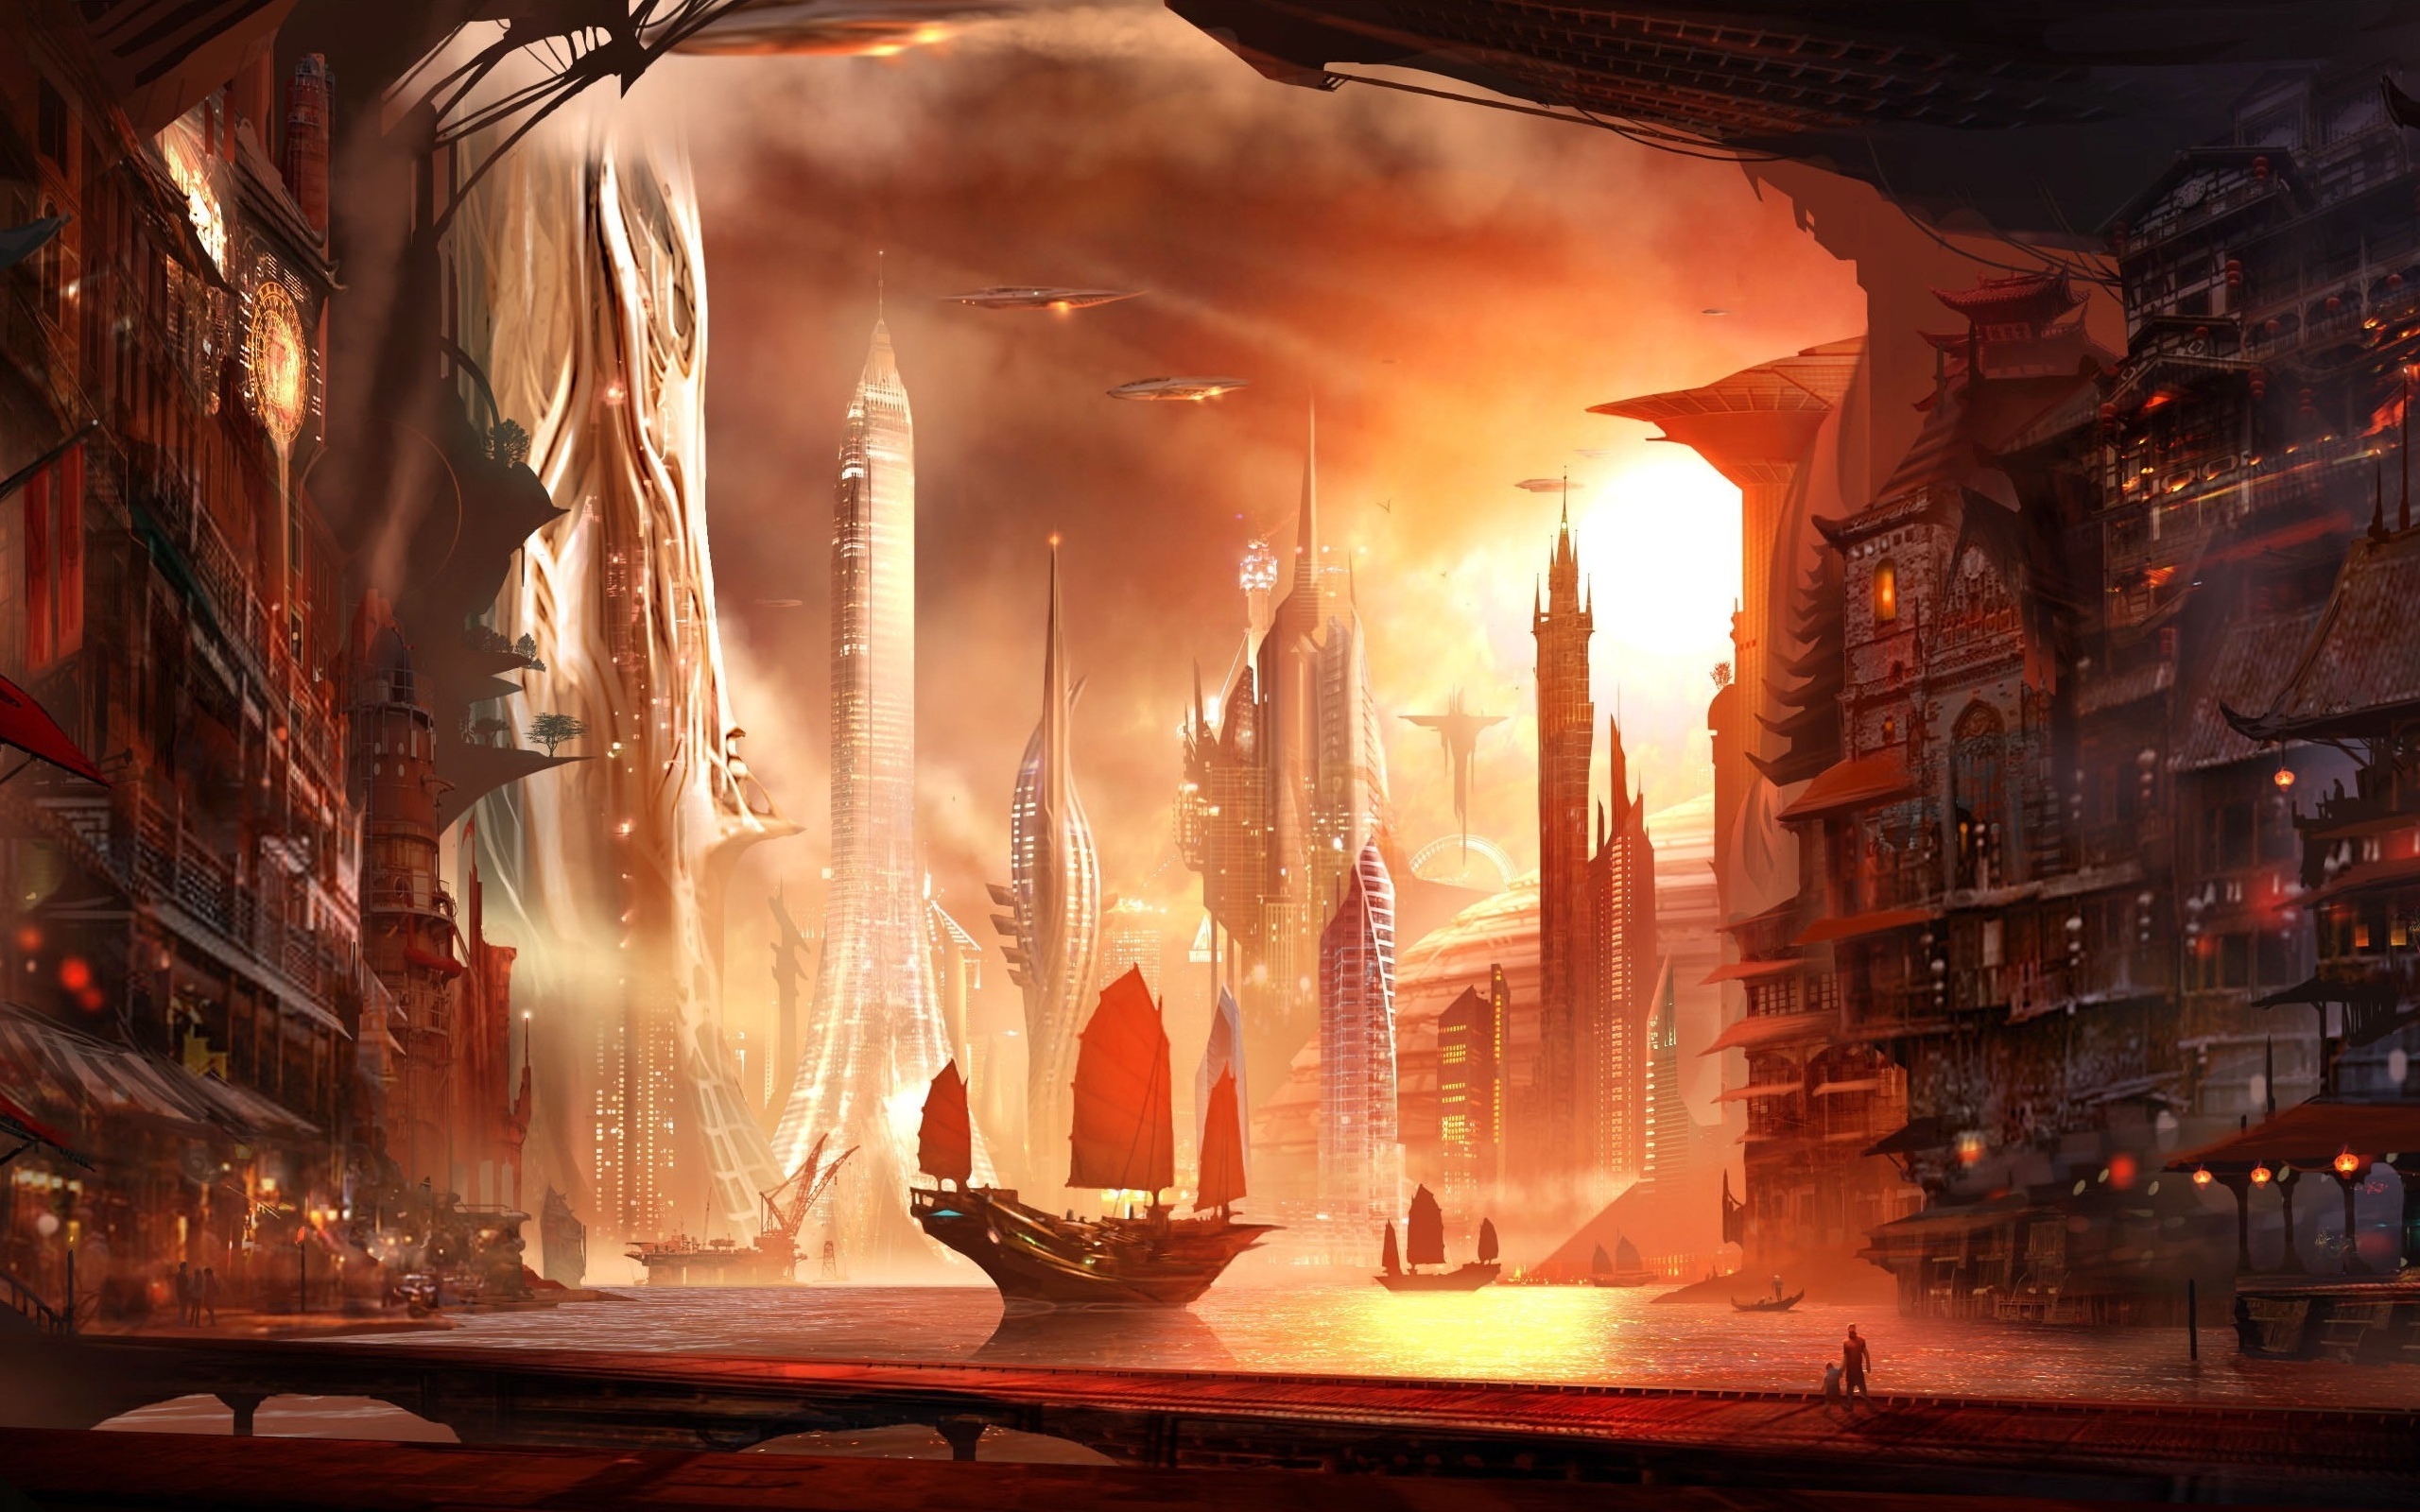 Fantasy City Wallpapers For Android For Free Wallpaper - Asian Sci Fi City - HD Wallpaper 